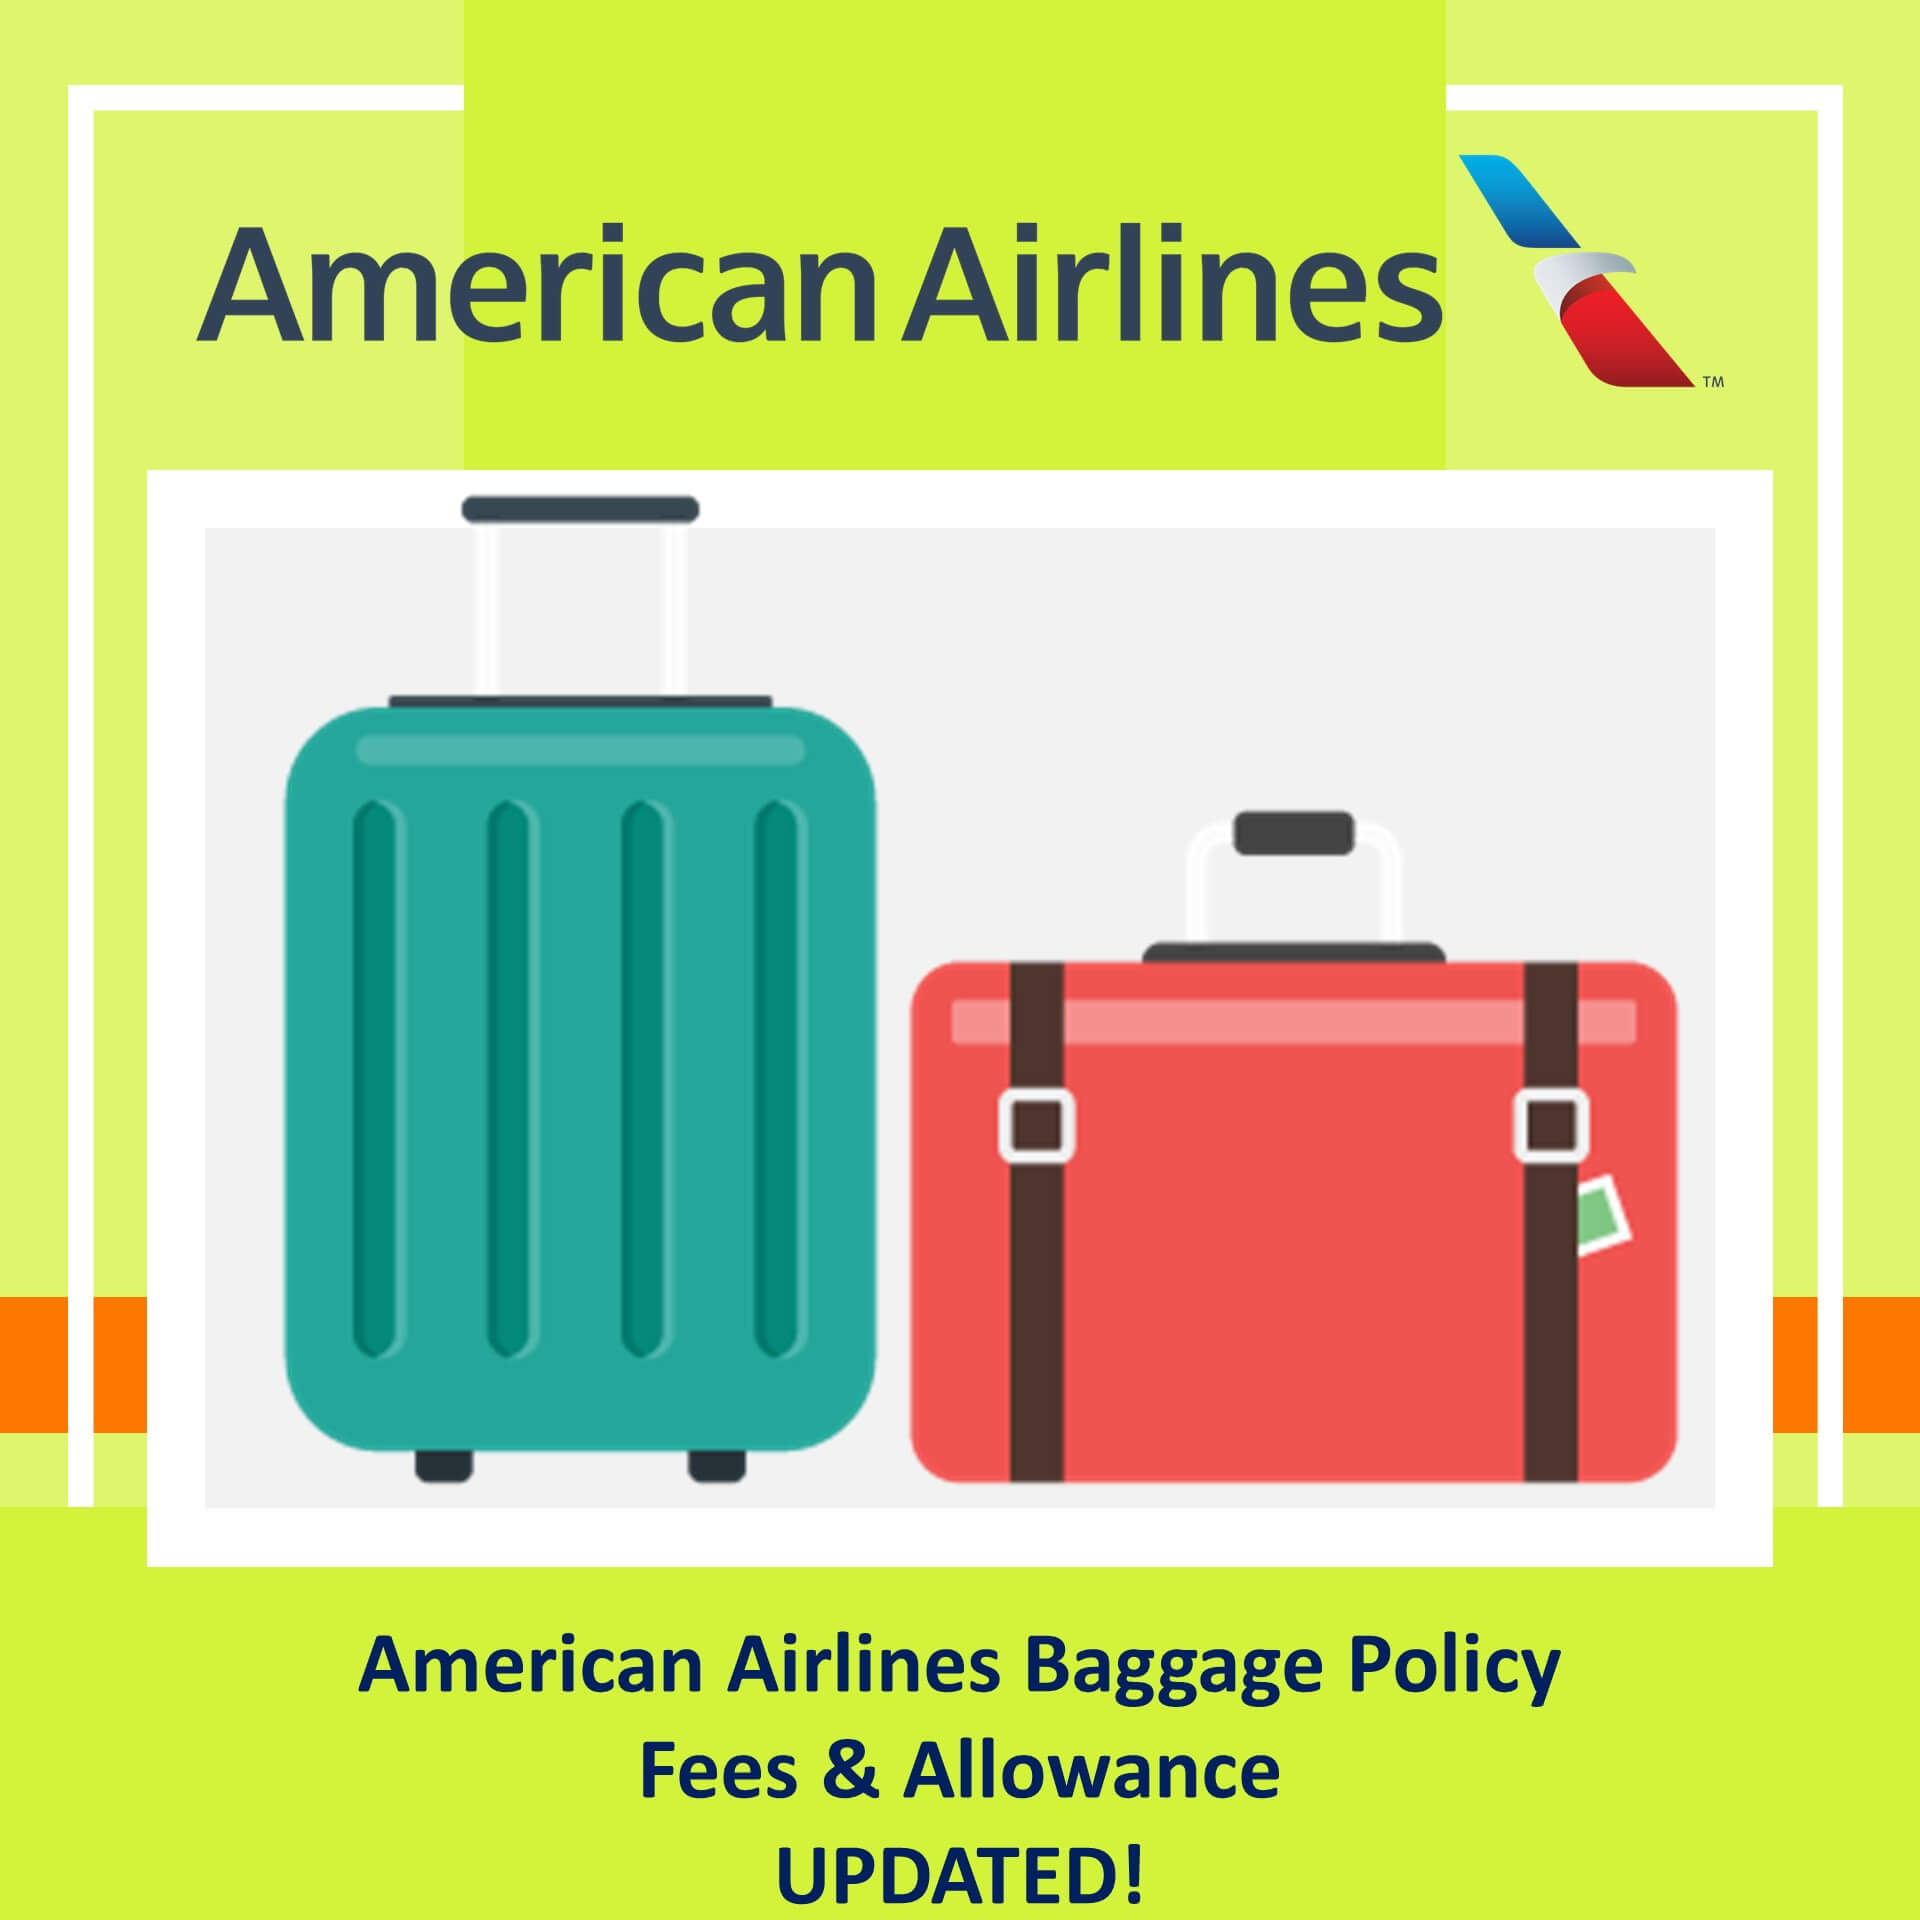 American Airlines Announces Baggage Fee Changes